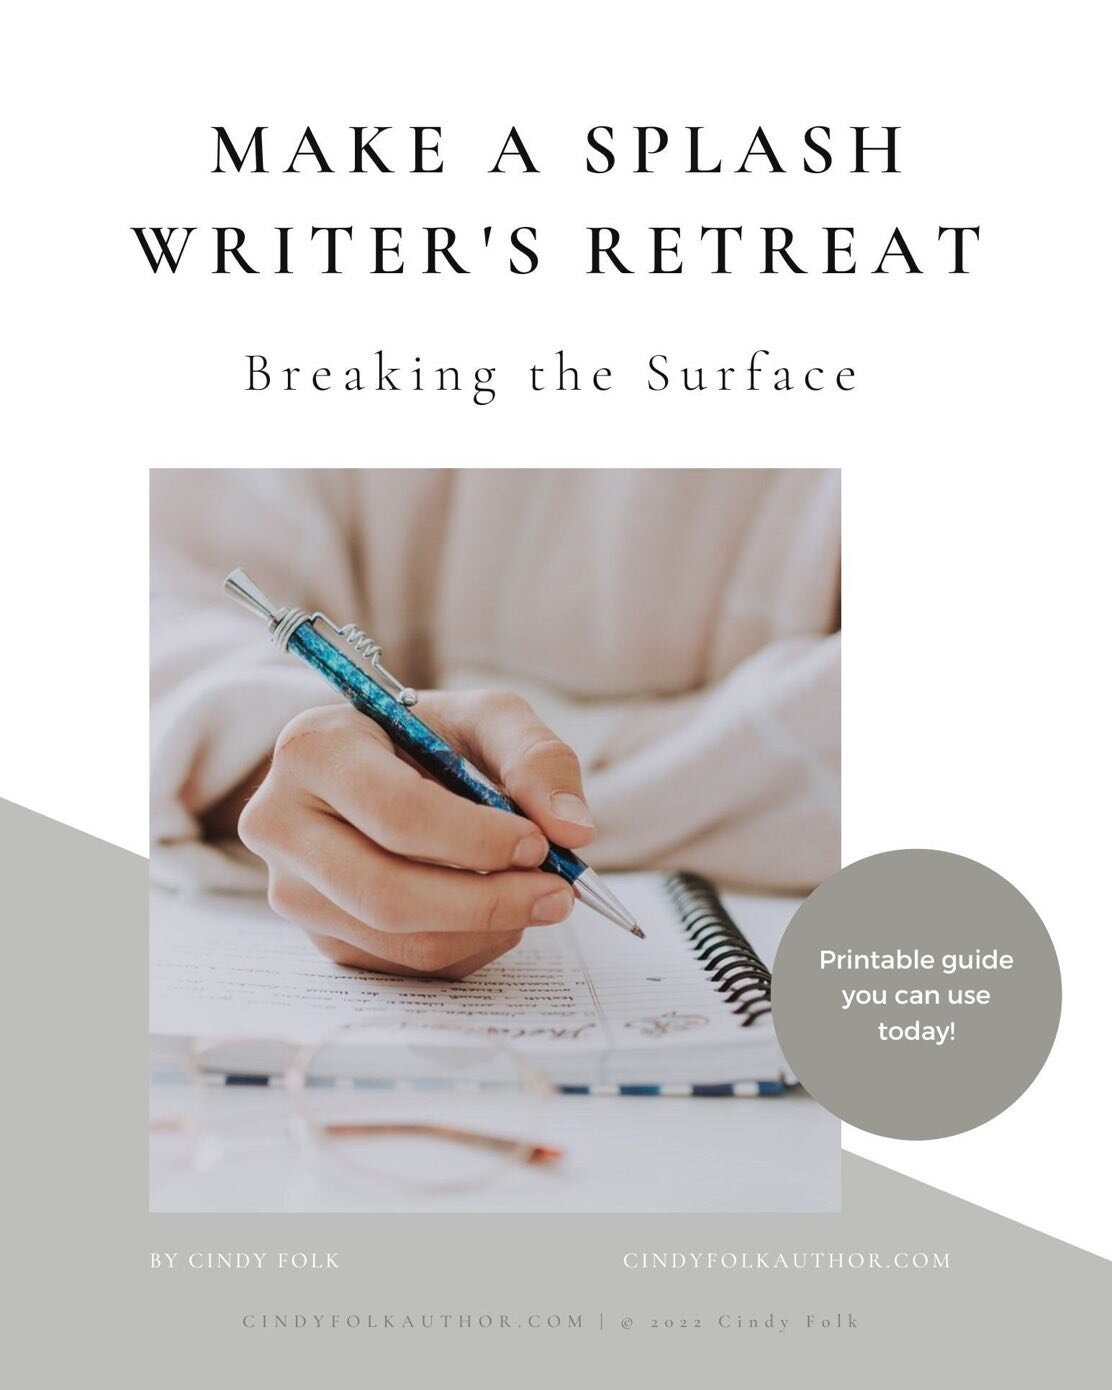 Looking for something to do this long weekend? Visit my Etsy store, download your Writer&rsquo;s Retreat workbook and settle in to do some writing!

Here is the link!
https://www.etsy.com/listing/1350107661/personal-writing-retreat